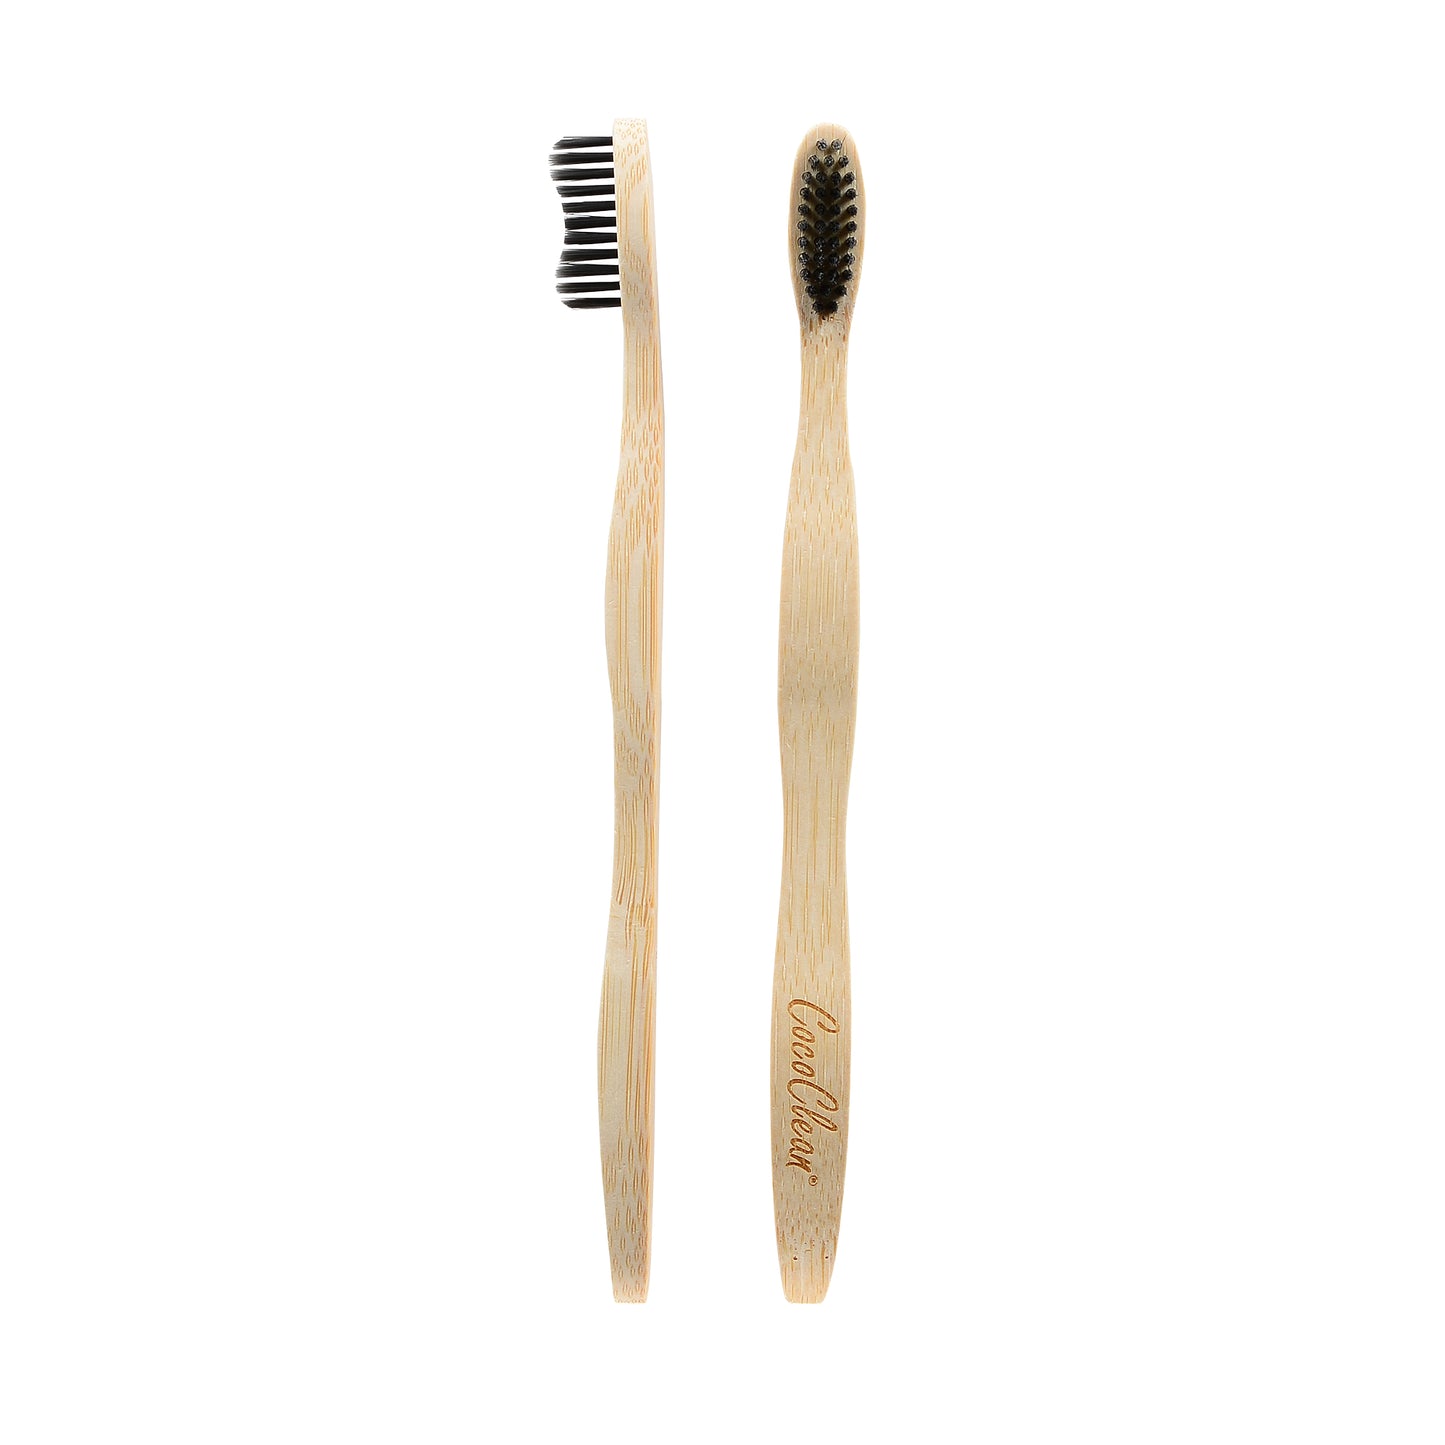 Cococlean Eco-friendly Charcoal Toothbrush, fully biodegradable - soft bristles